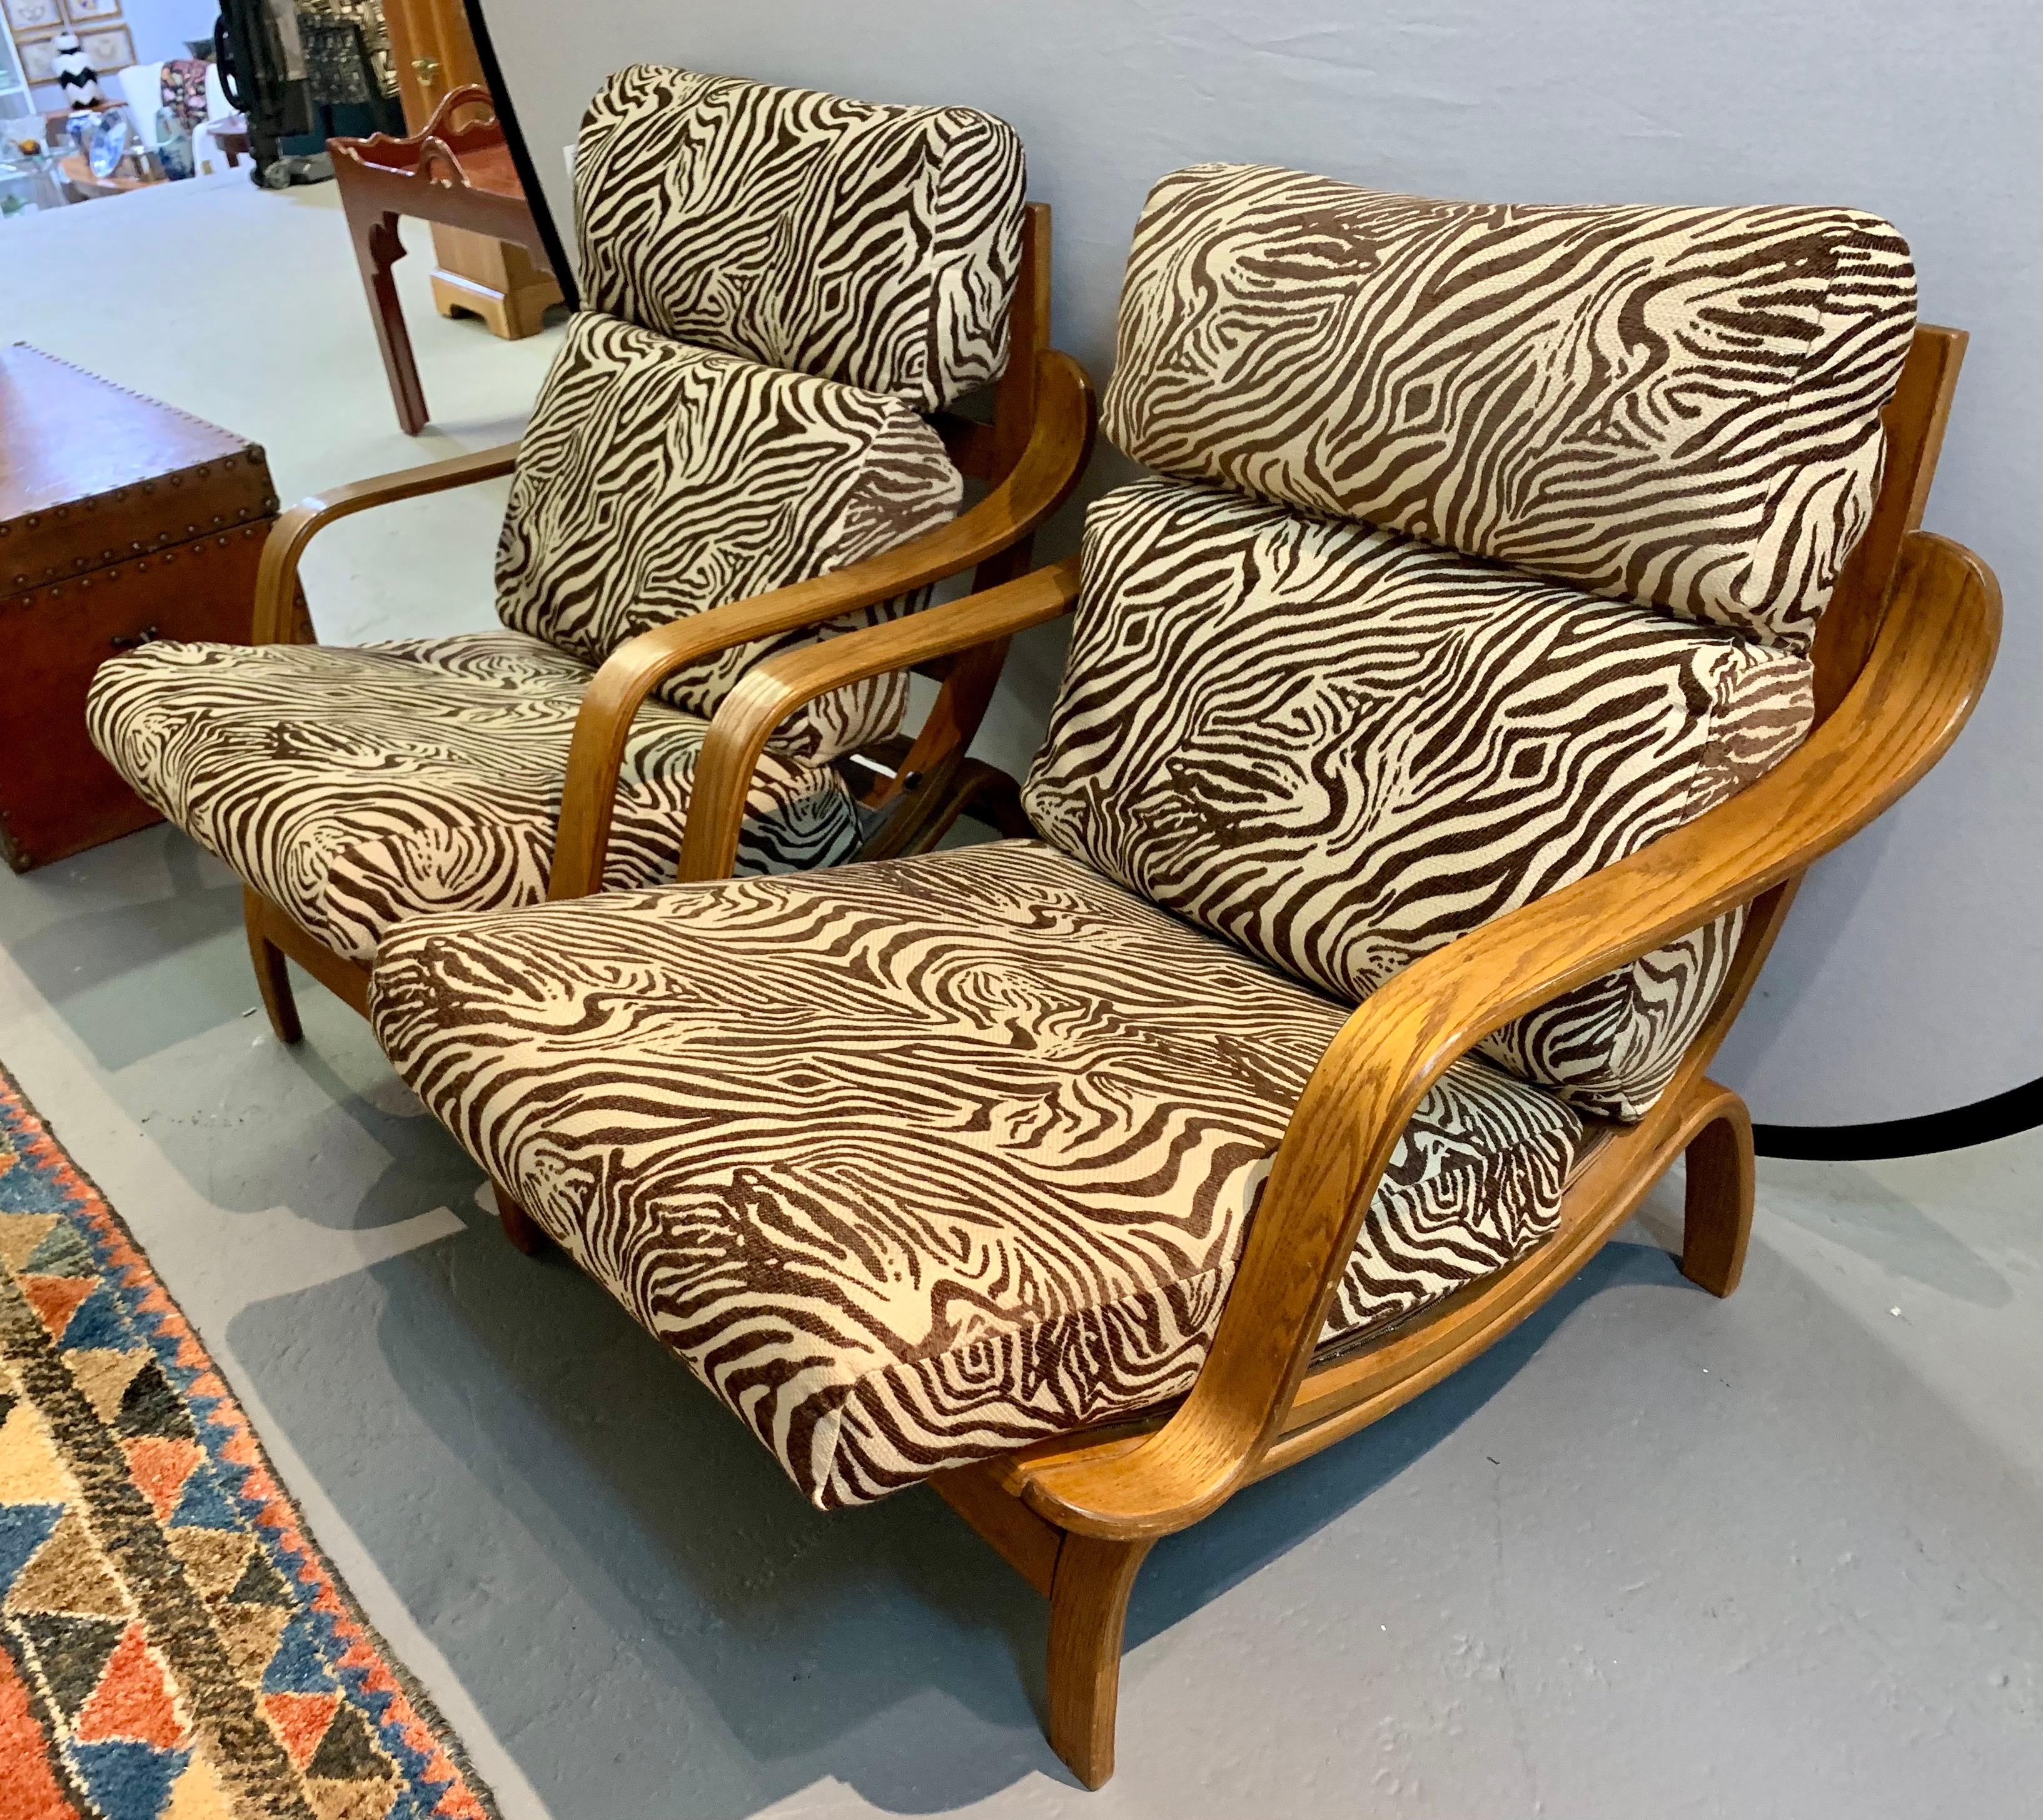 Mid century vintage bentwood lounge chairs with arched legs that create a cradle for the chair body. The seat appears to float within the cradle base. Cushions have been newly upholstered in a zebra print fabric.